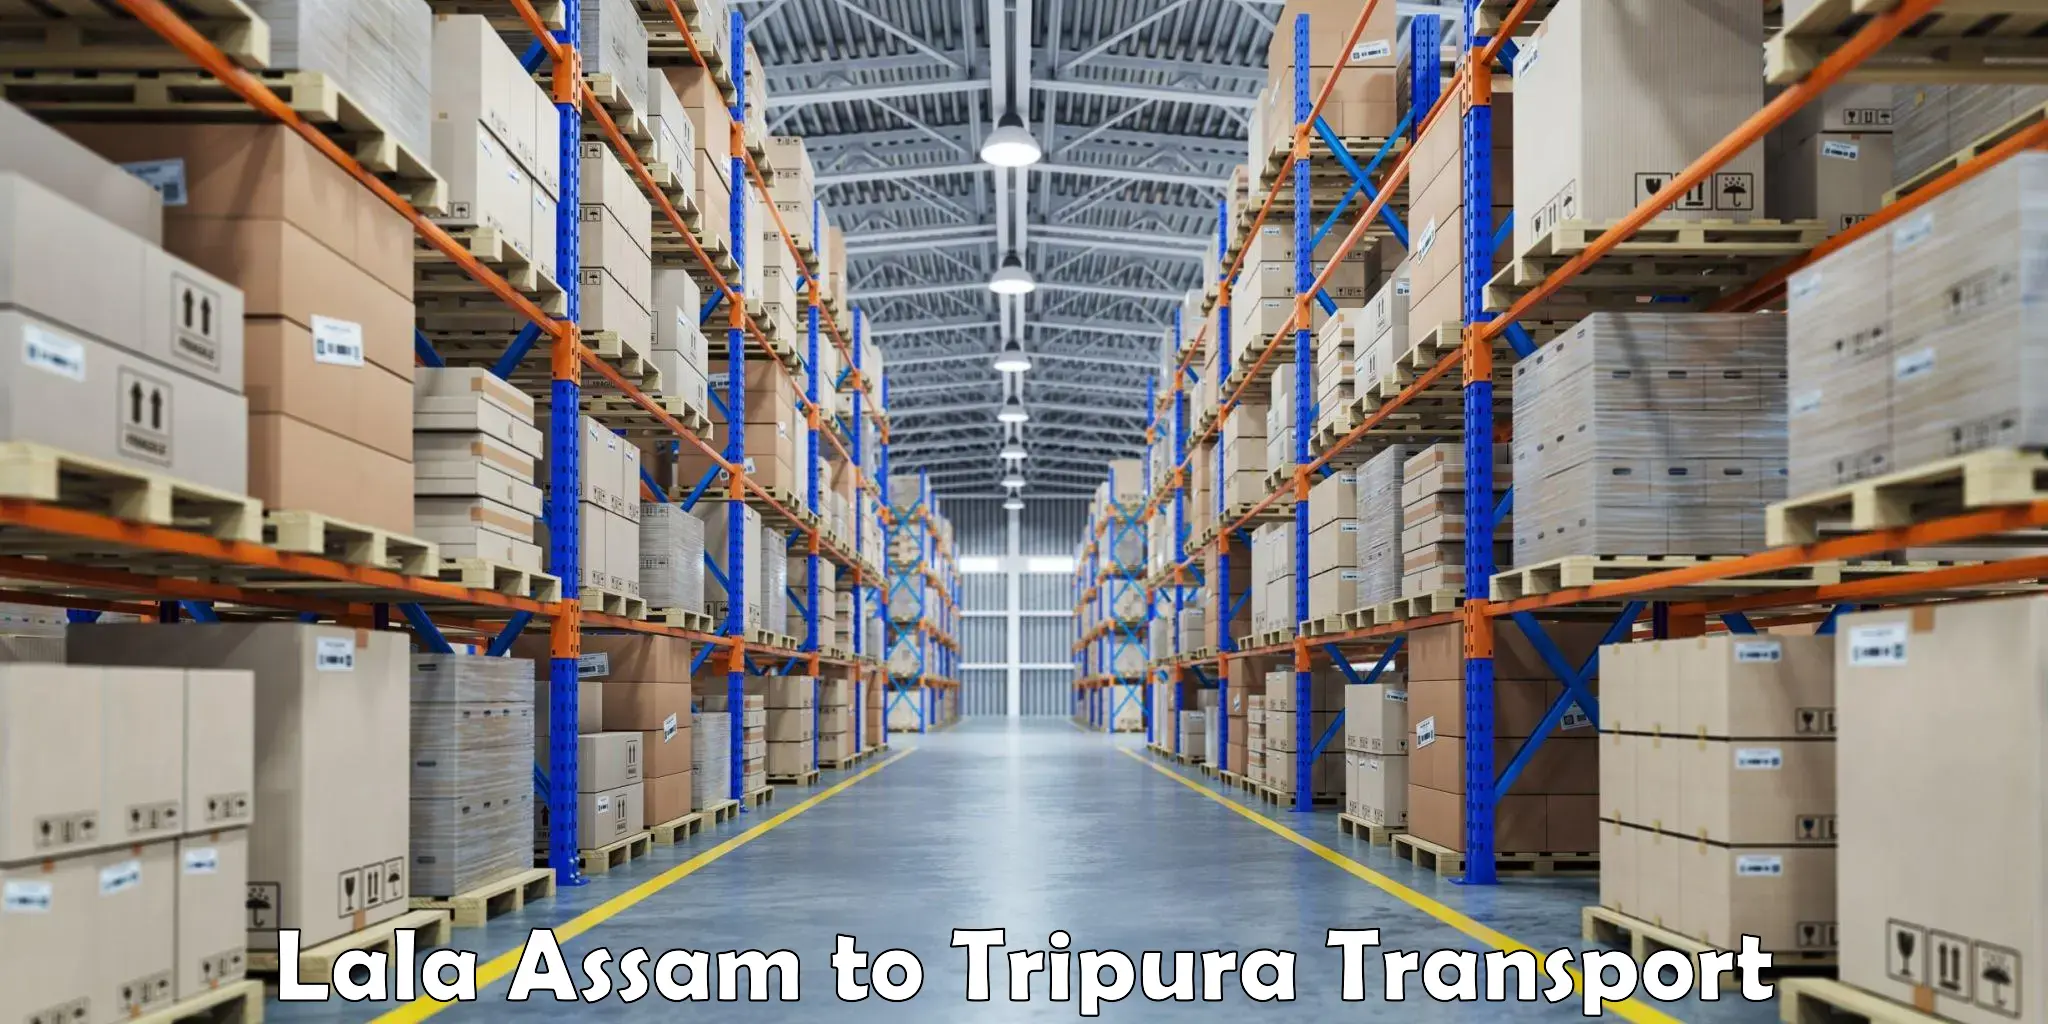 Nearby transport service Lala Assam to Amarpur